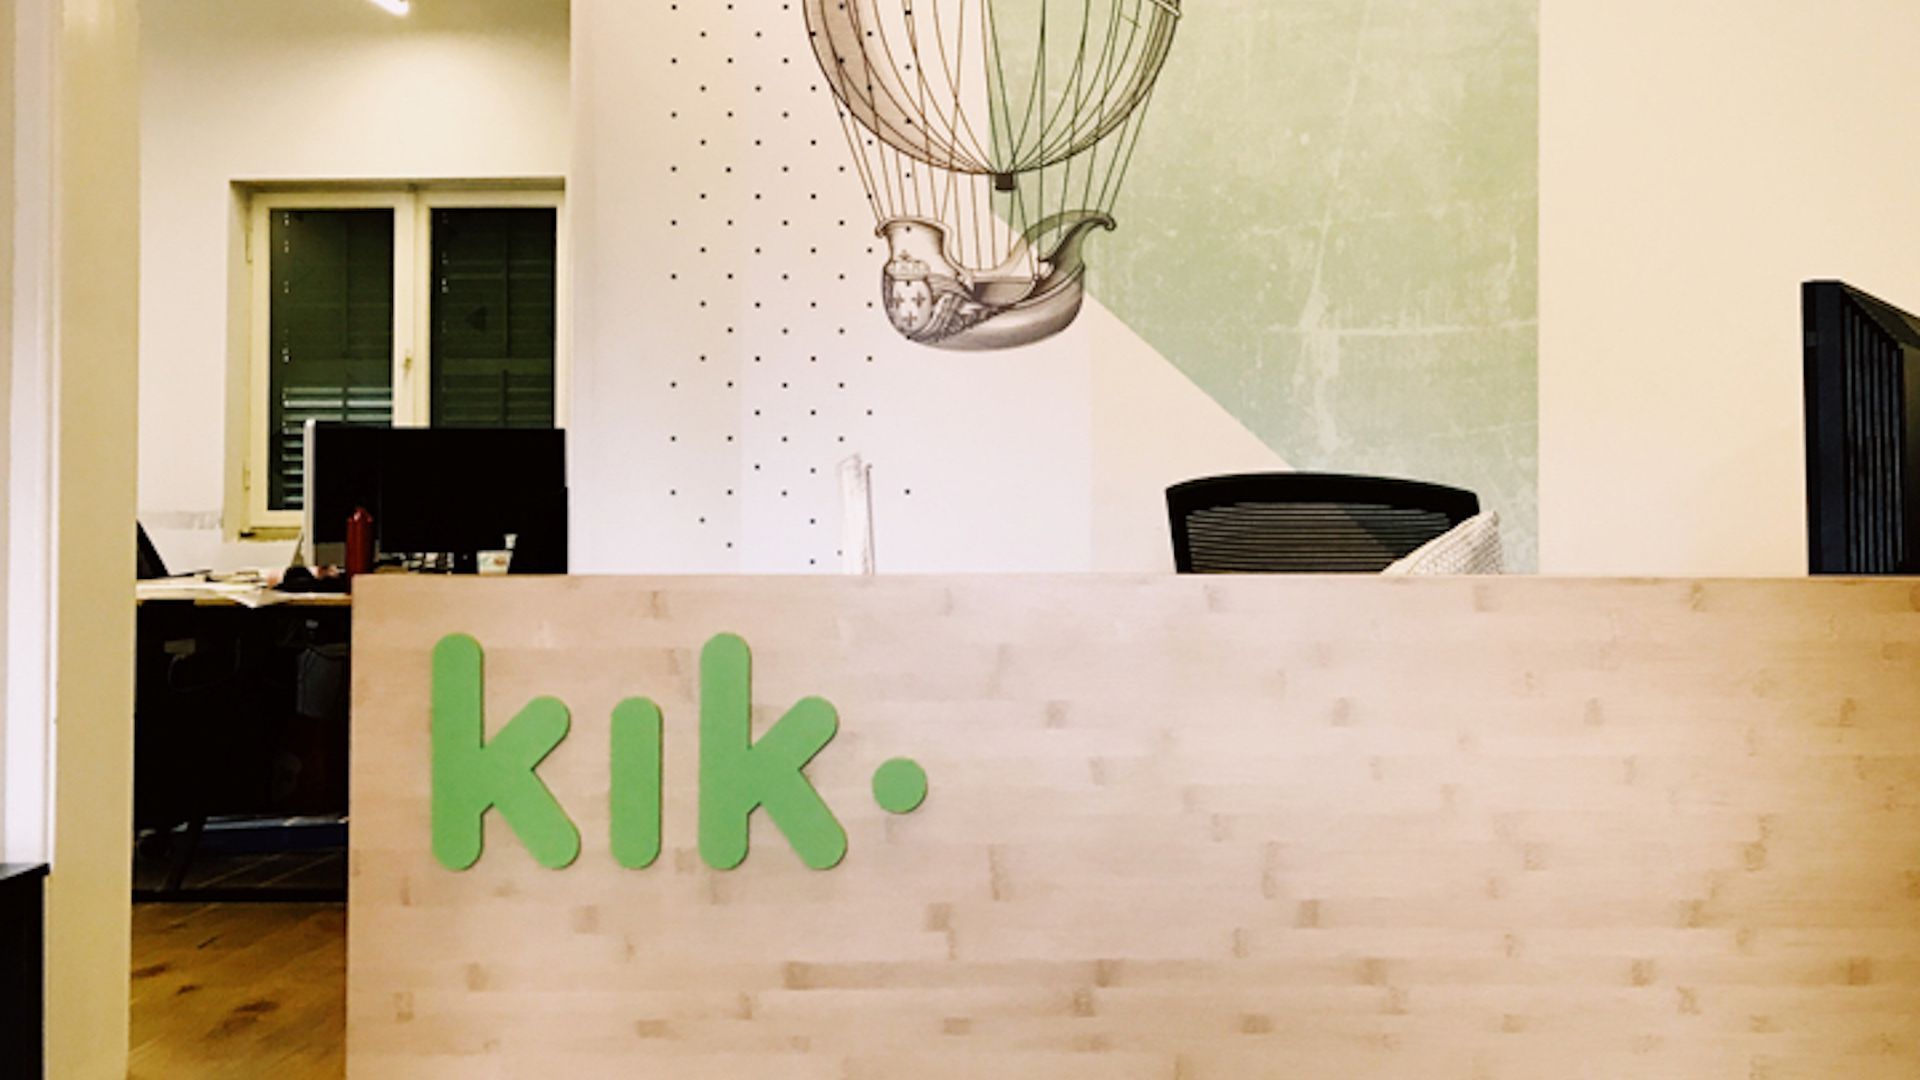 The offices of Kik